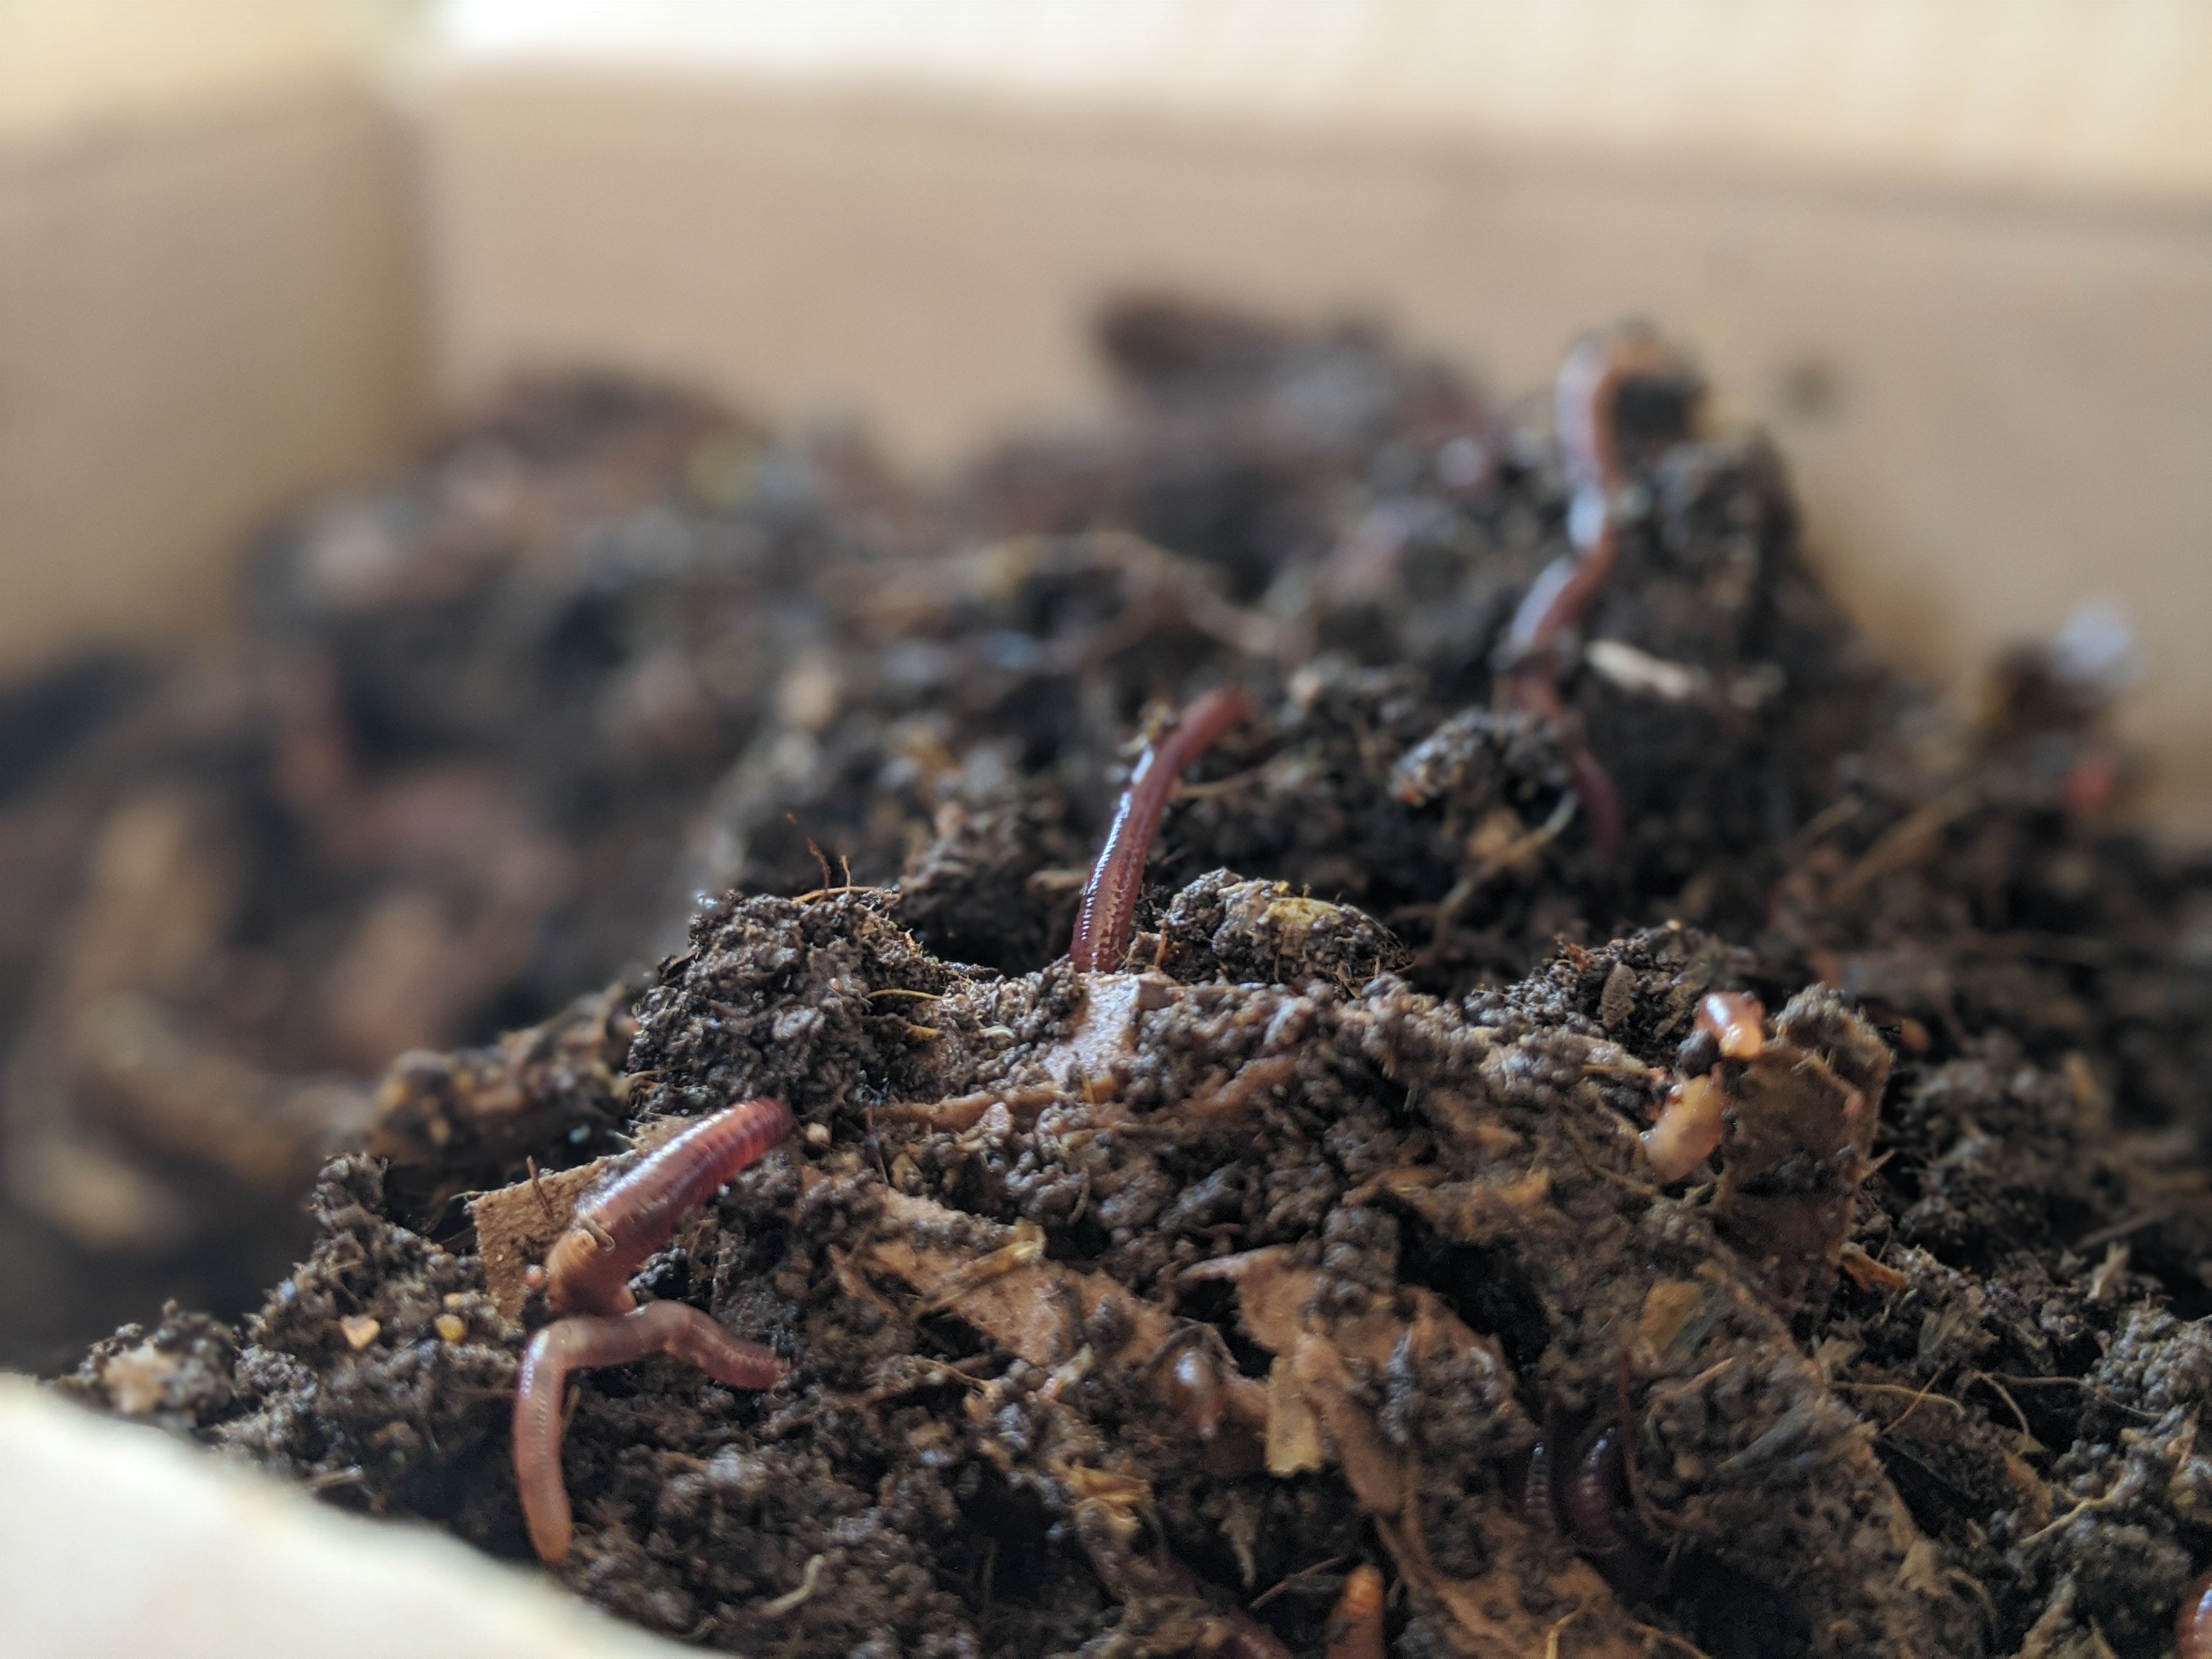 Red wigglers (Ottawa only) composting earthworms – The Box Of Life